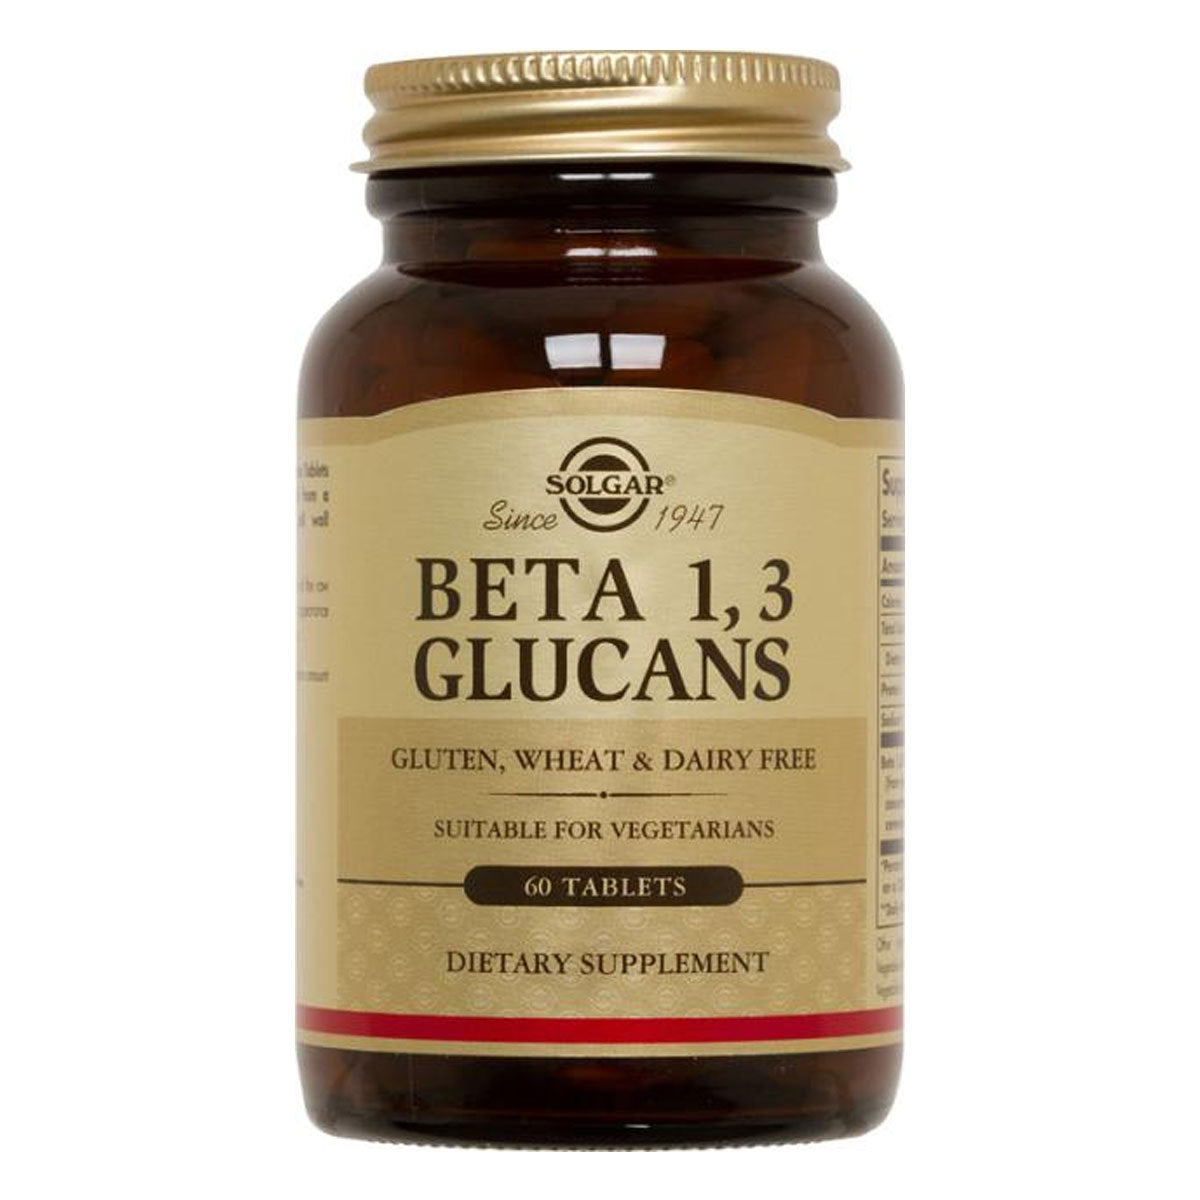 Primary image of Beta 1,3 Glucans